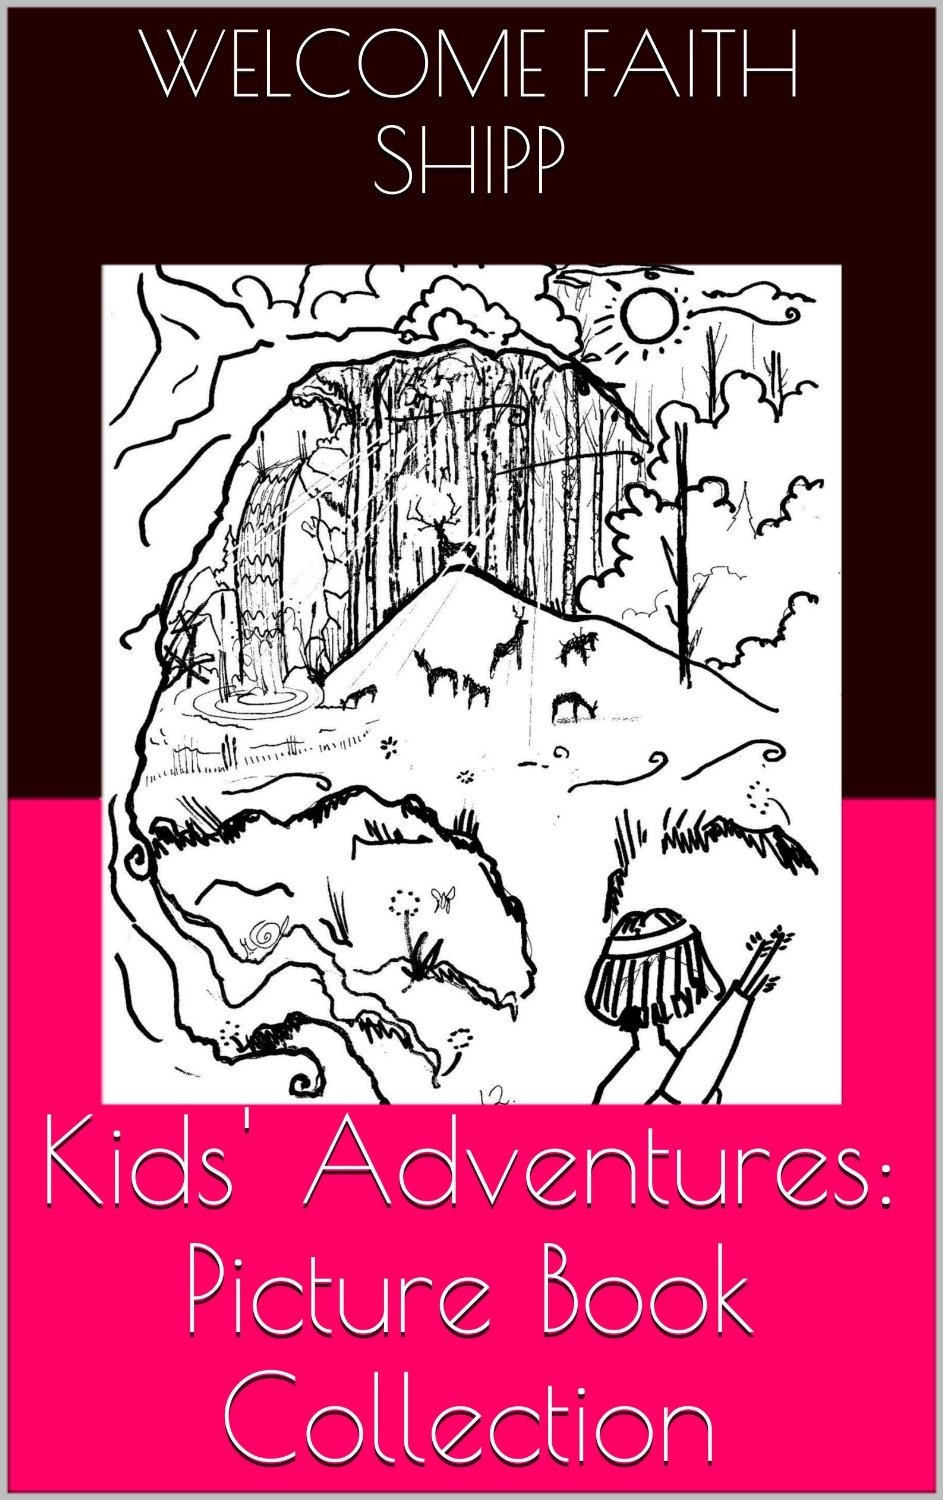 Kids’ Adventures: Picture Book Collection by Welcome Faith Shipp